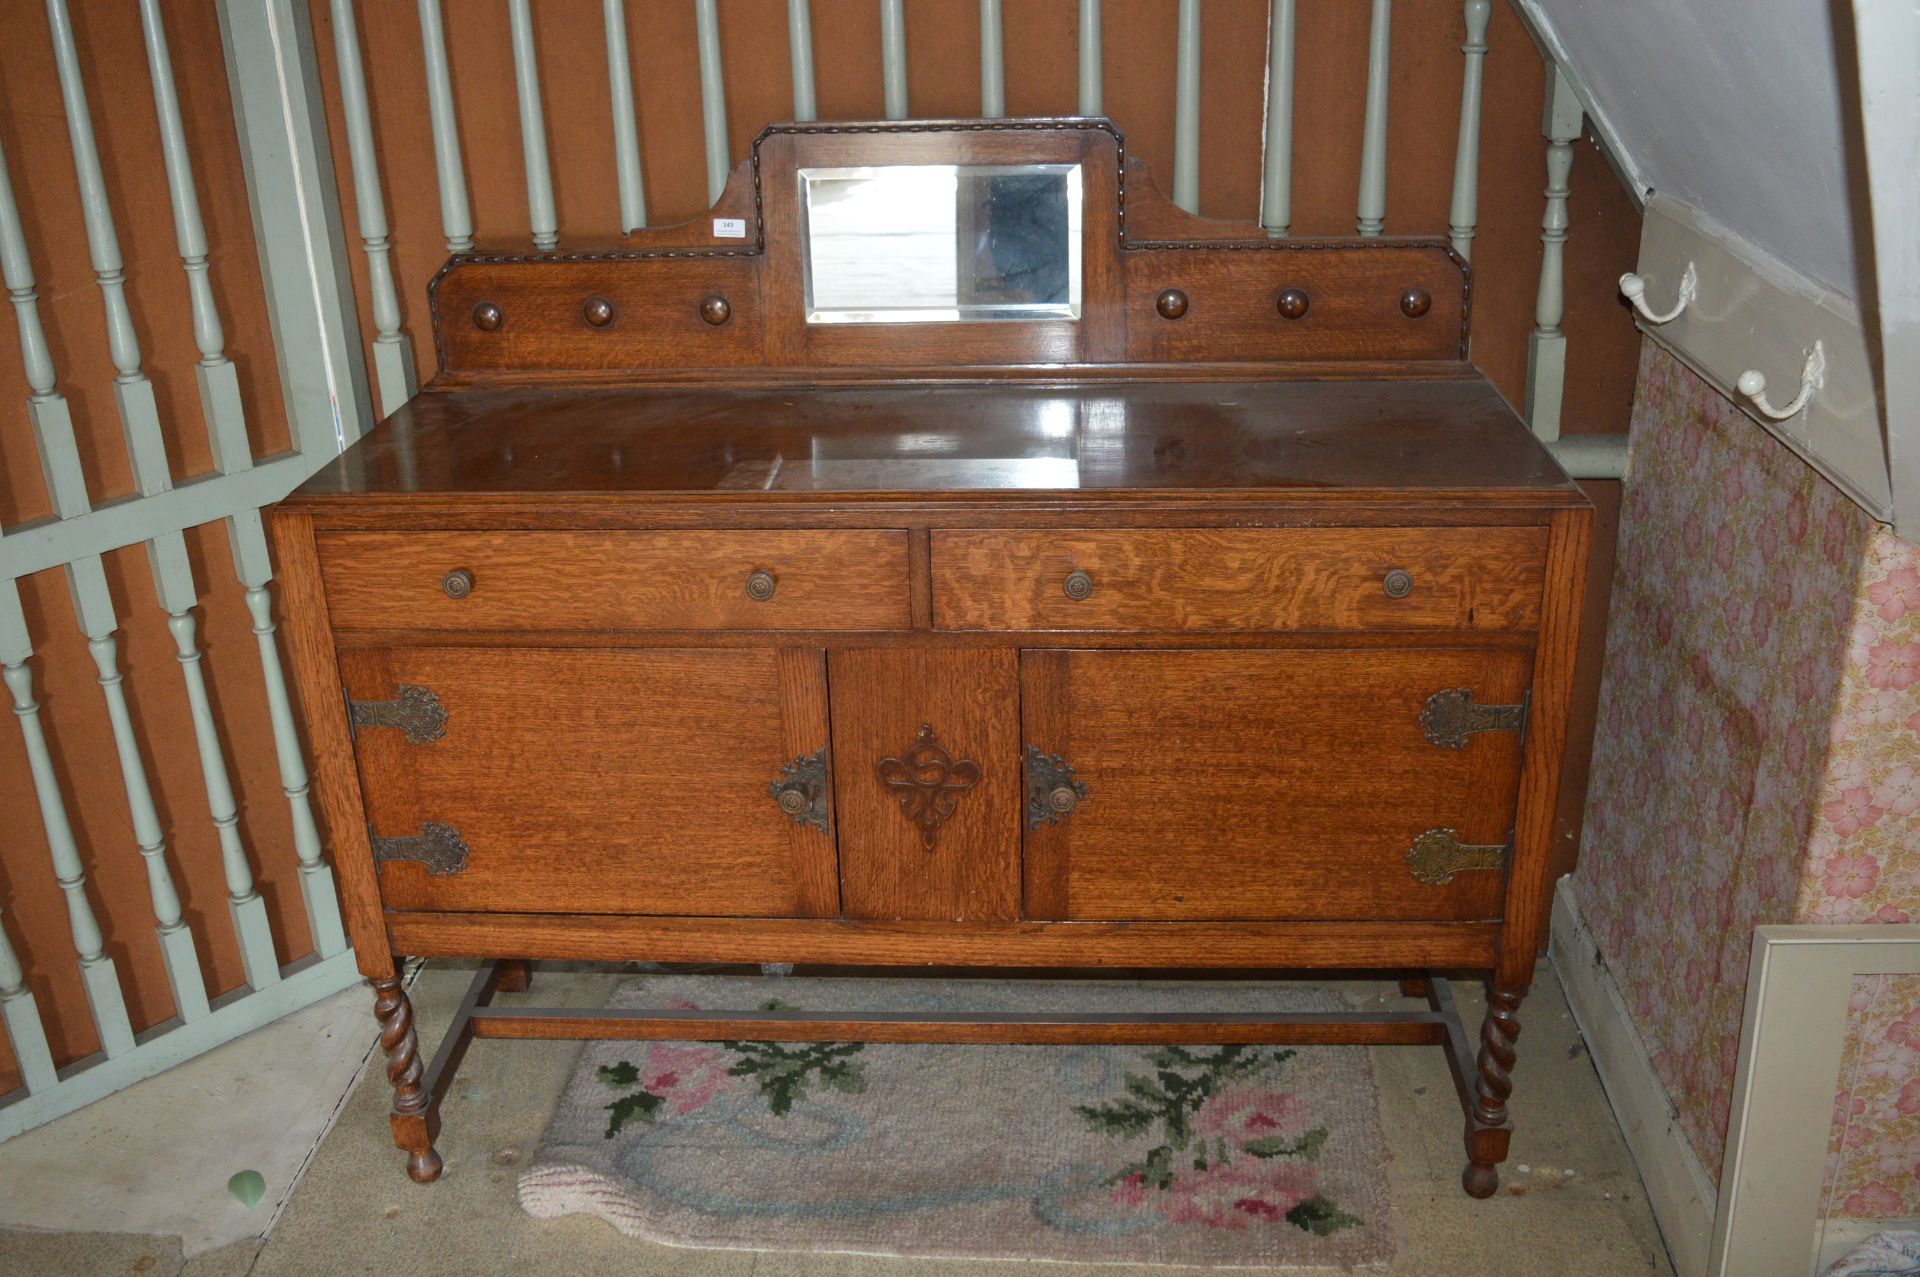 Vintage Cass Sideboard with Barley Twist Legs - Image 2 of 2